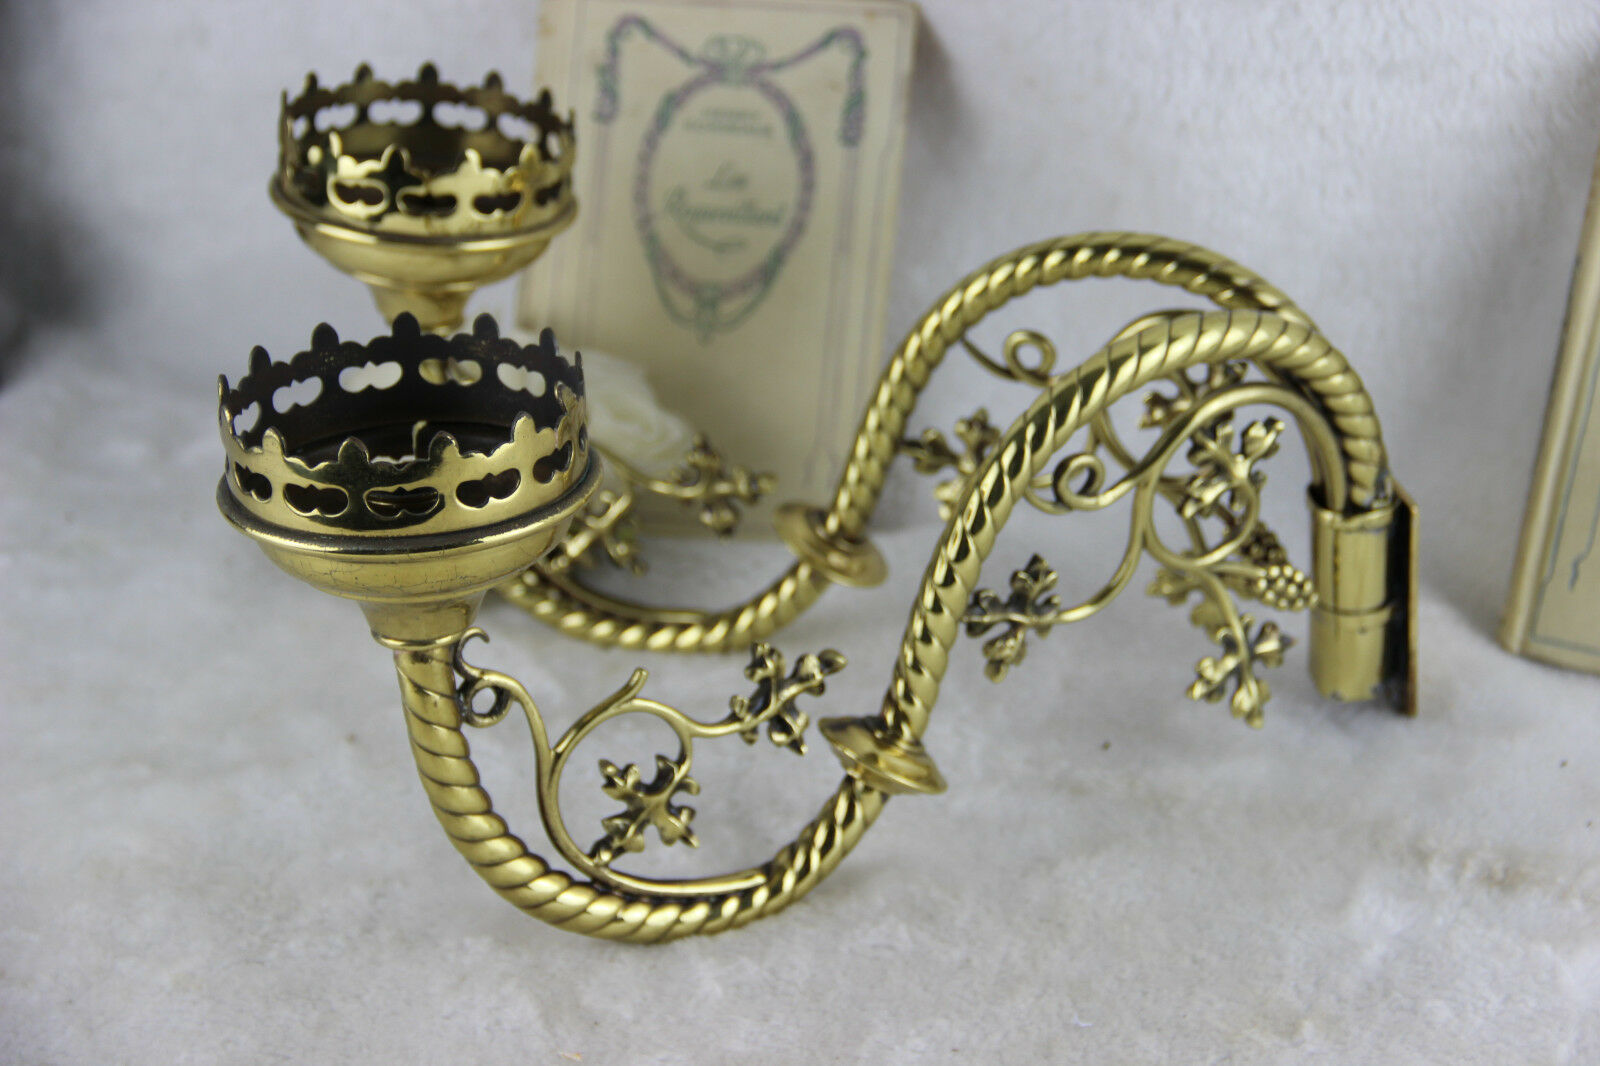 A Rare Pair And Very Decorative Brass Neo-Gothic Candlesticks.